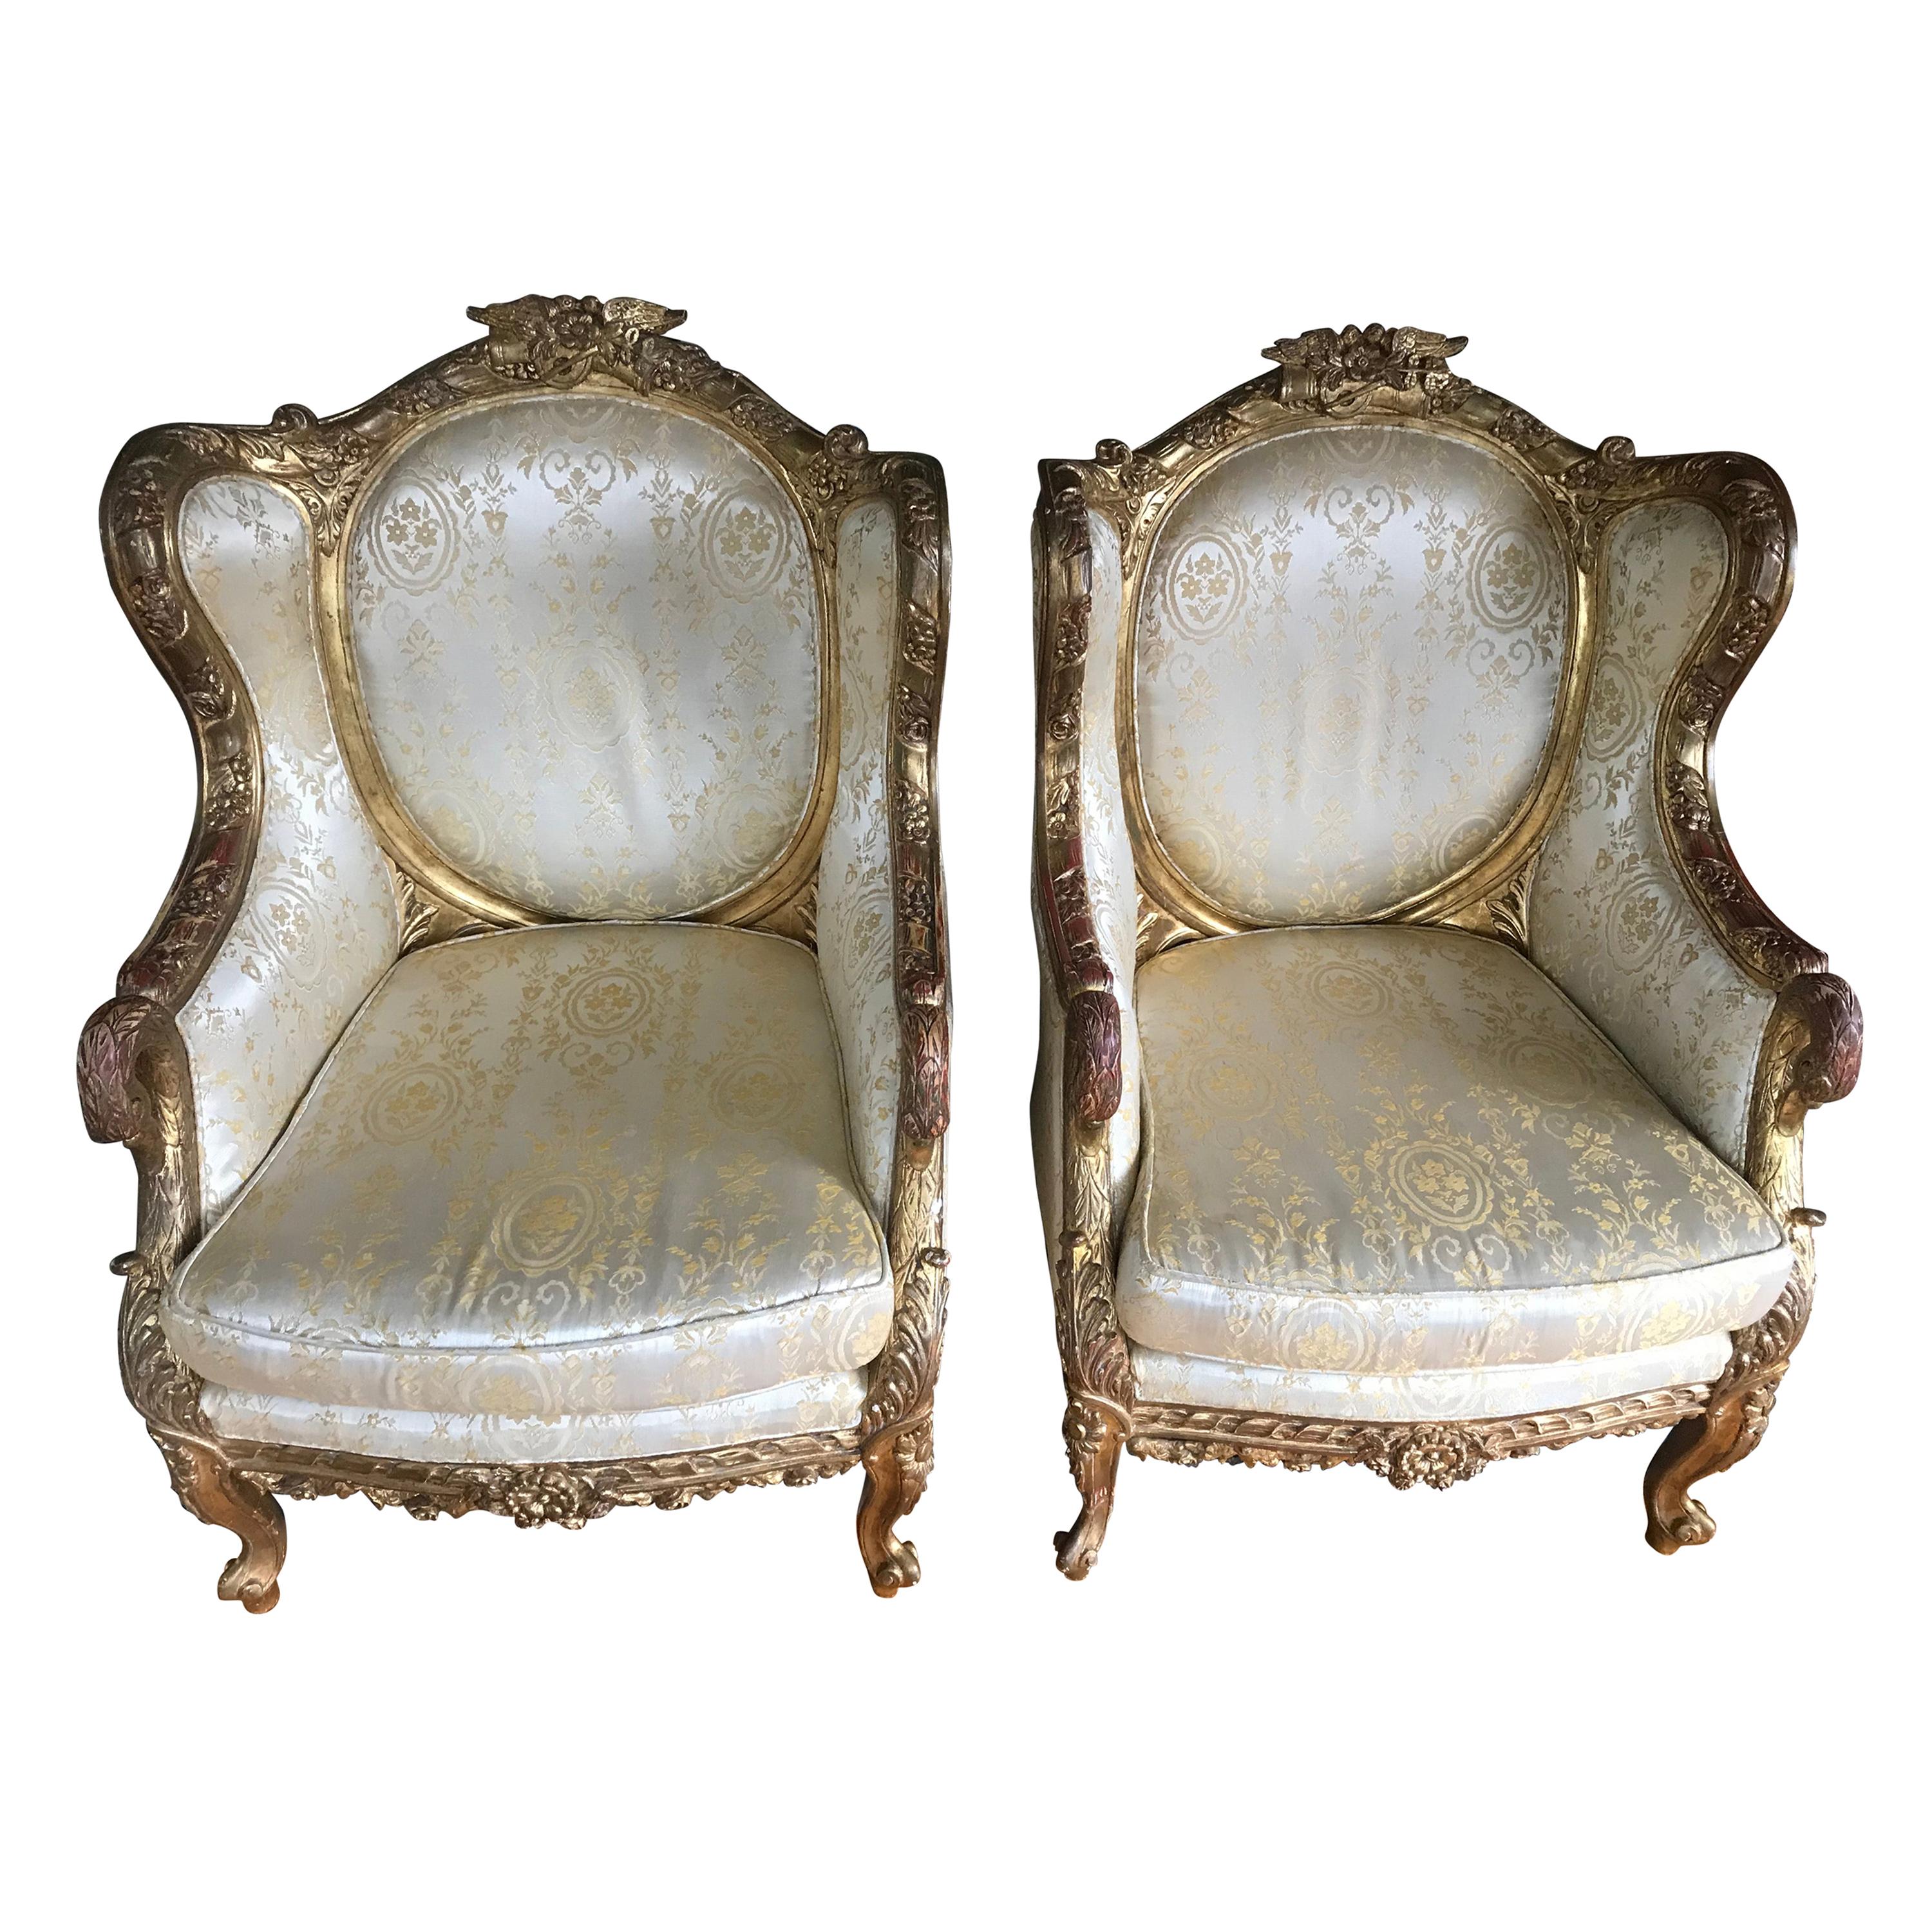 Pair of European Gold Gesso Upholstered Art Chairs, 19th Century For Sale